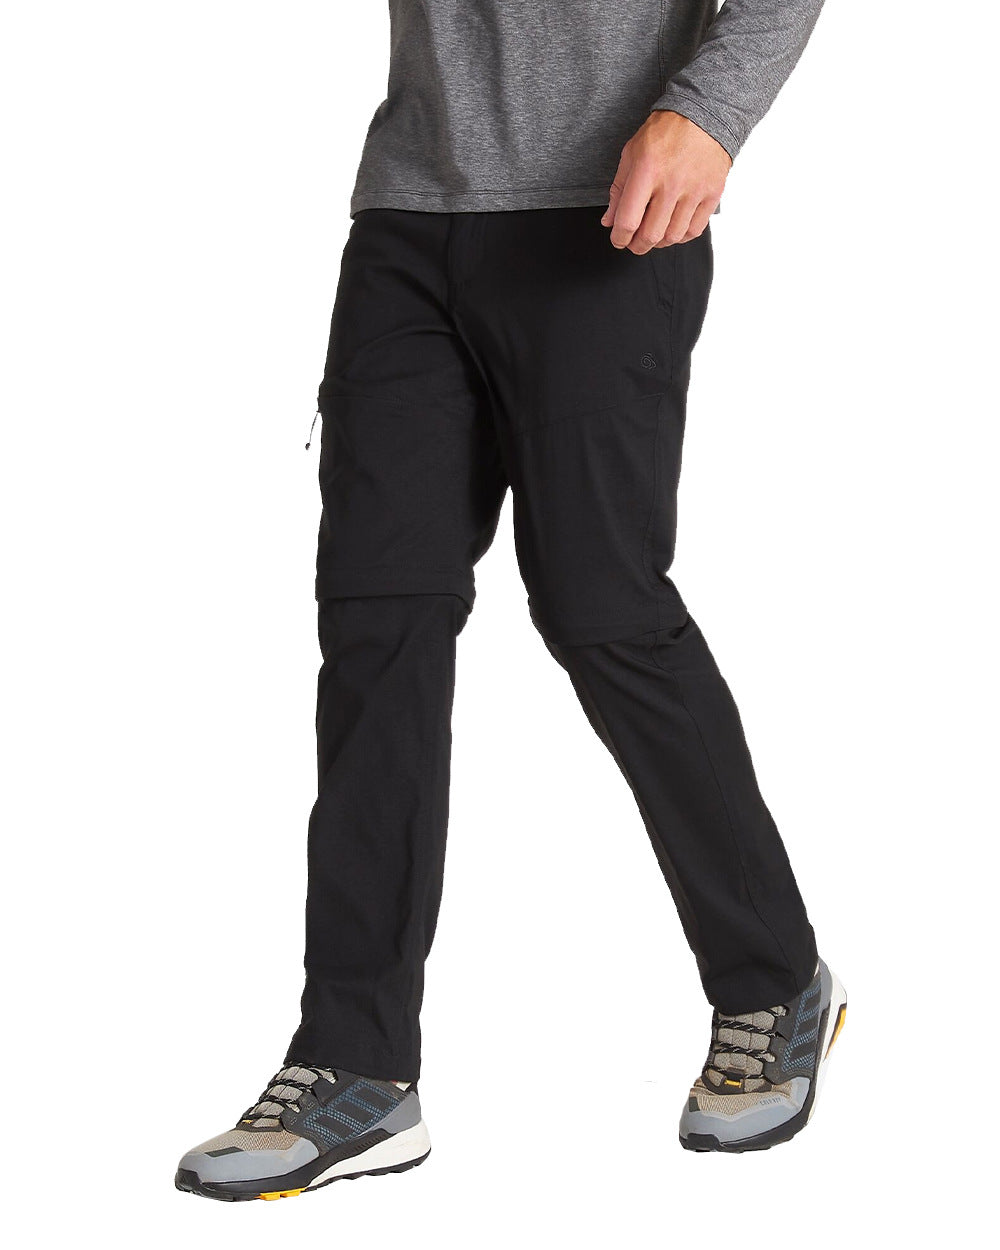 Black Coloured Craghoppers Mens Kiwi Pro II Convertible Trousers On A White Background 